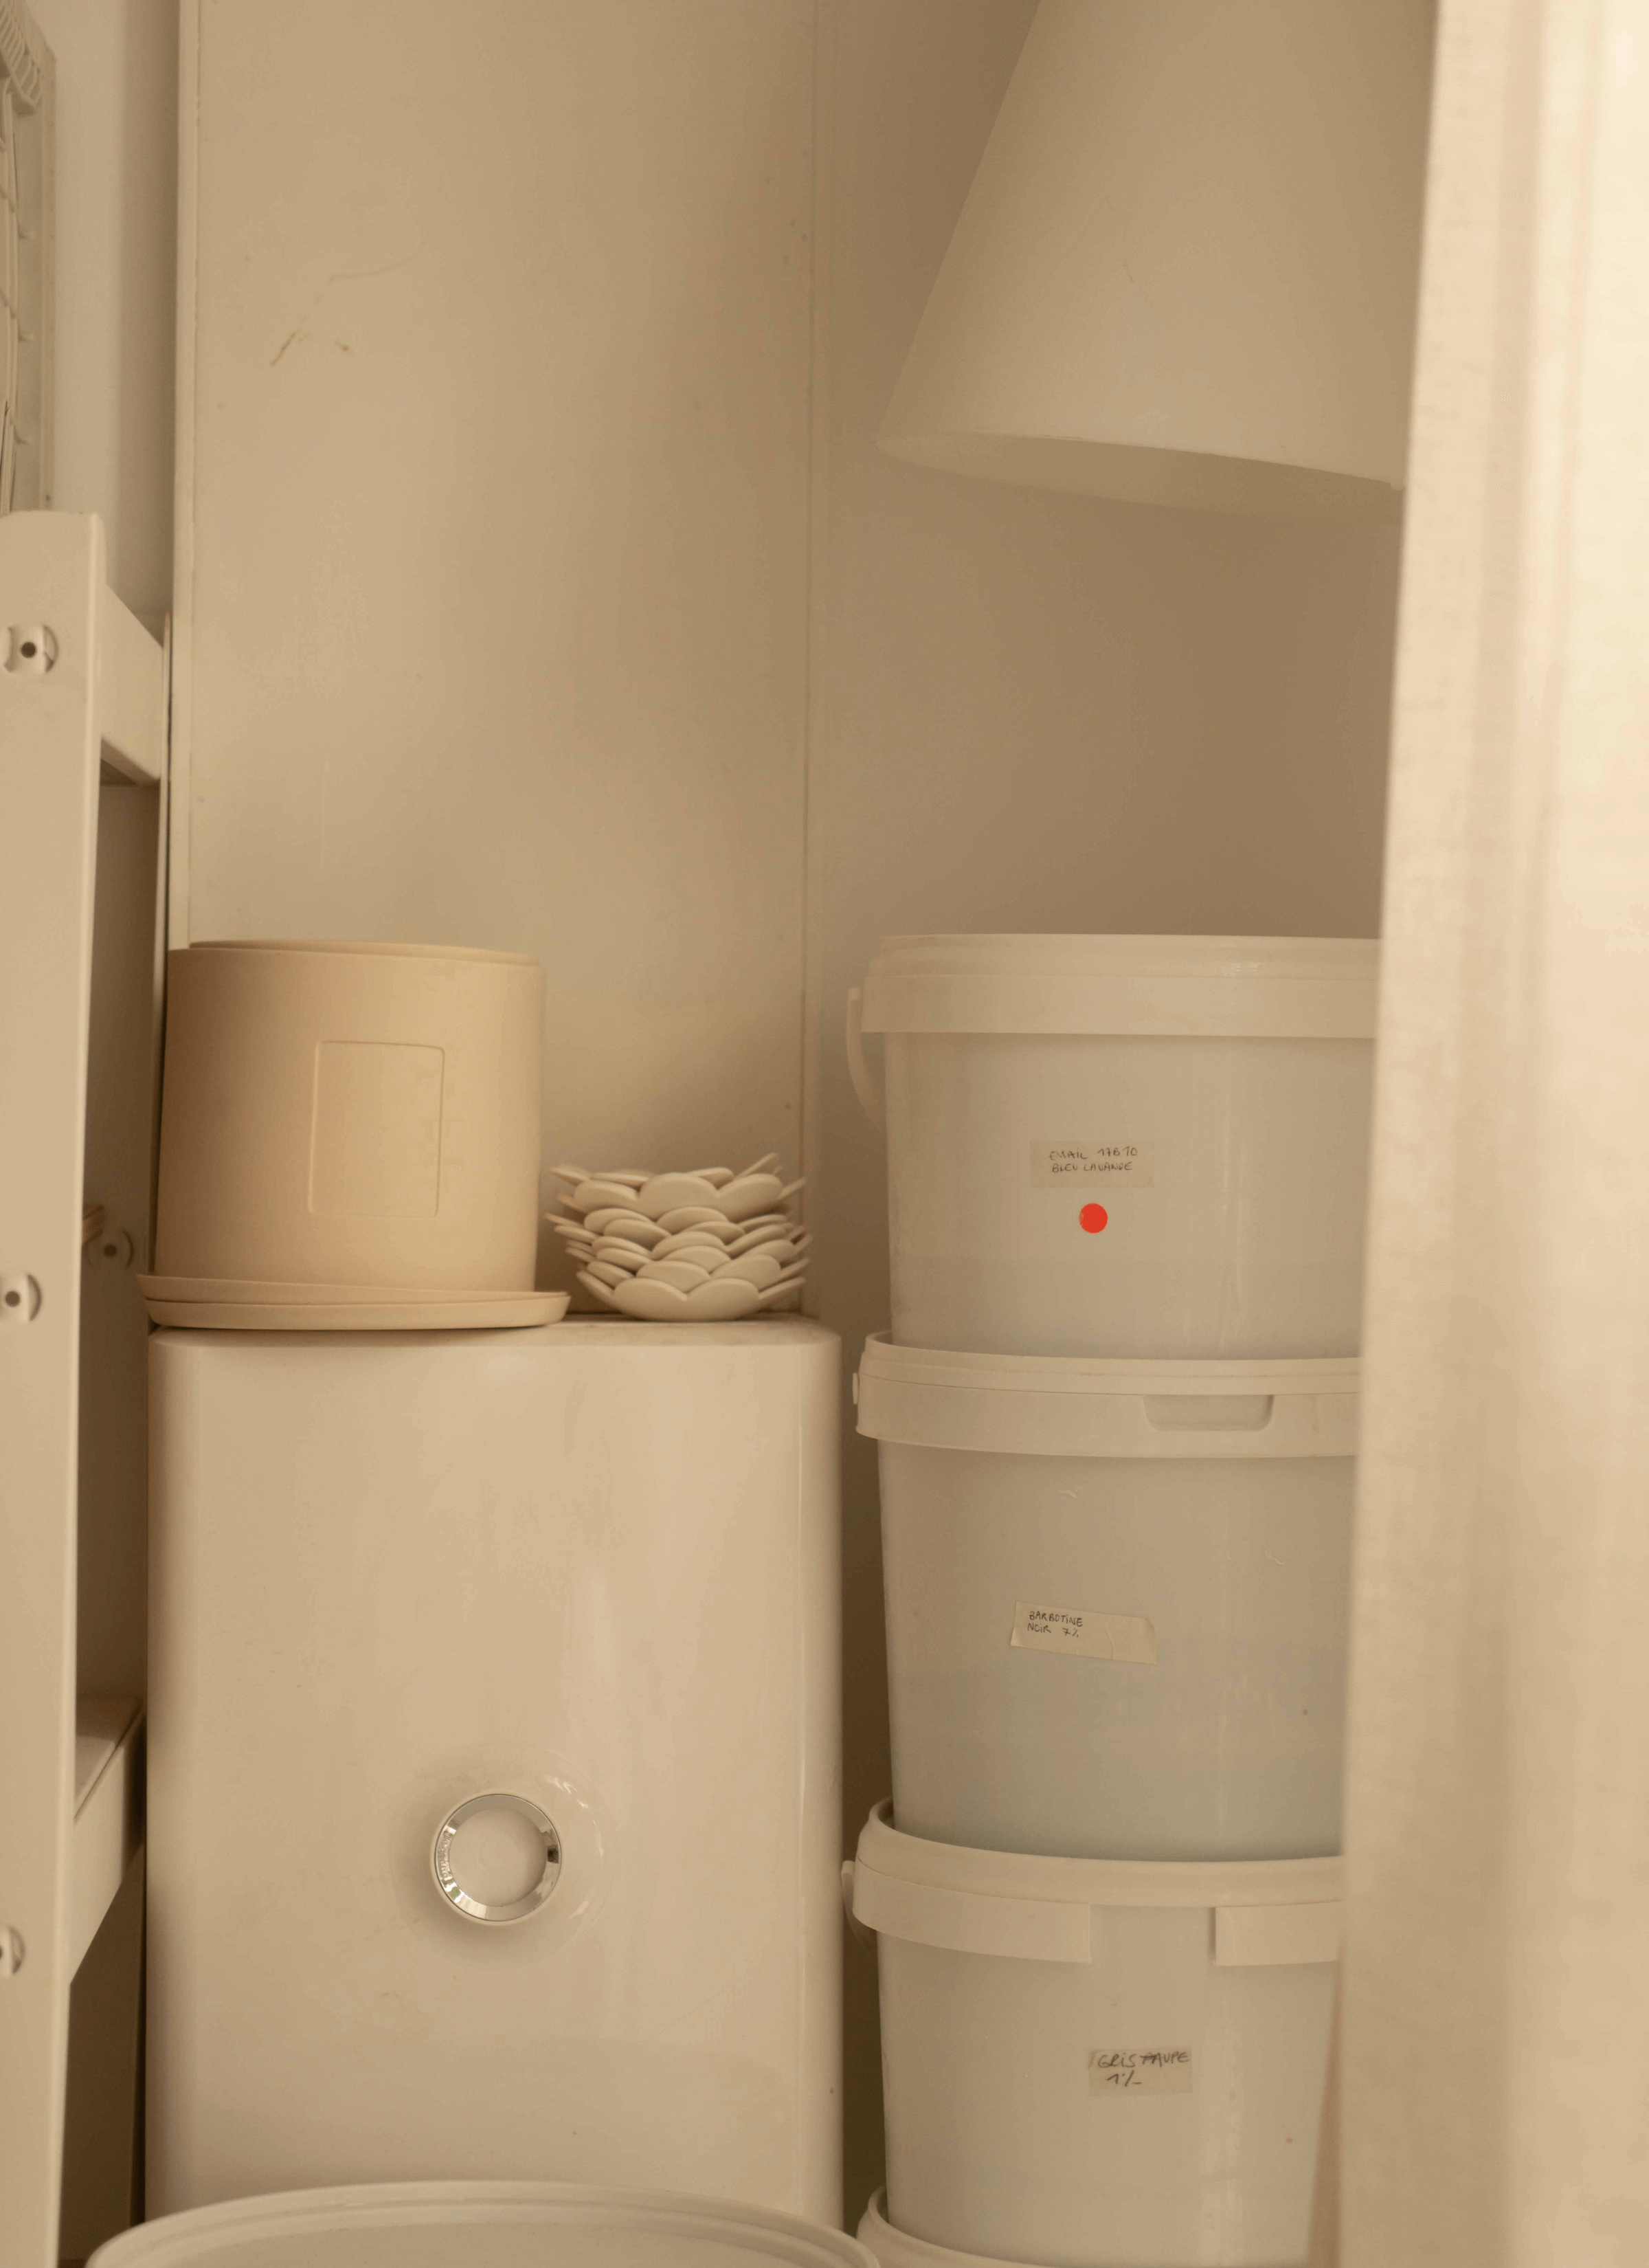 Against the wall, a few plastic buckets are stacked neatly beside a white box. Resting atop the box is a ceramic pot accompanied by ceramic saucers and stacked germination discs. The arrangement showcases a blend of materials, from plastic to ceramic, suggesting a workspace where practicality meets creativity.